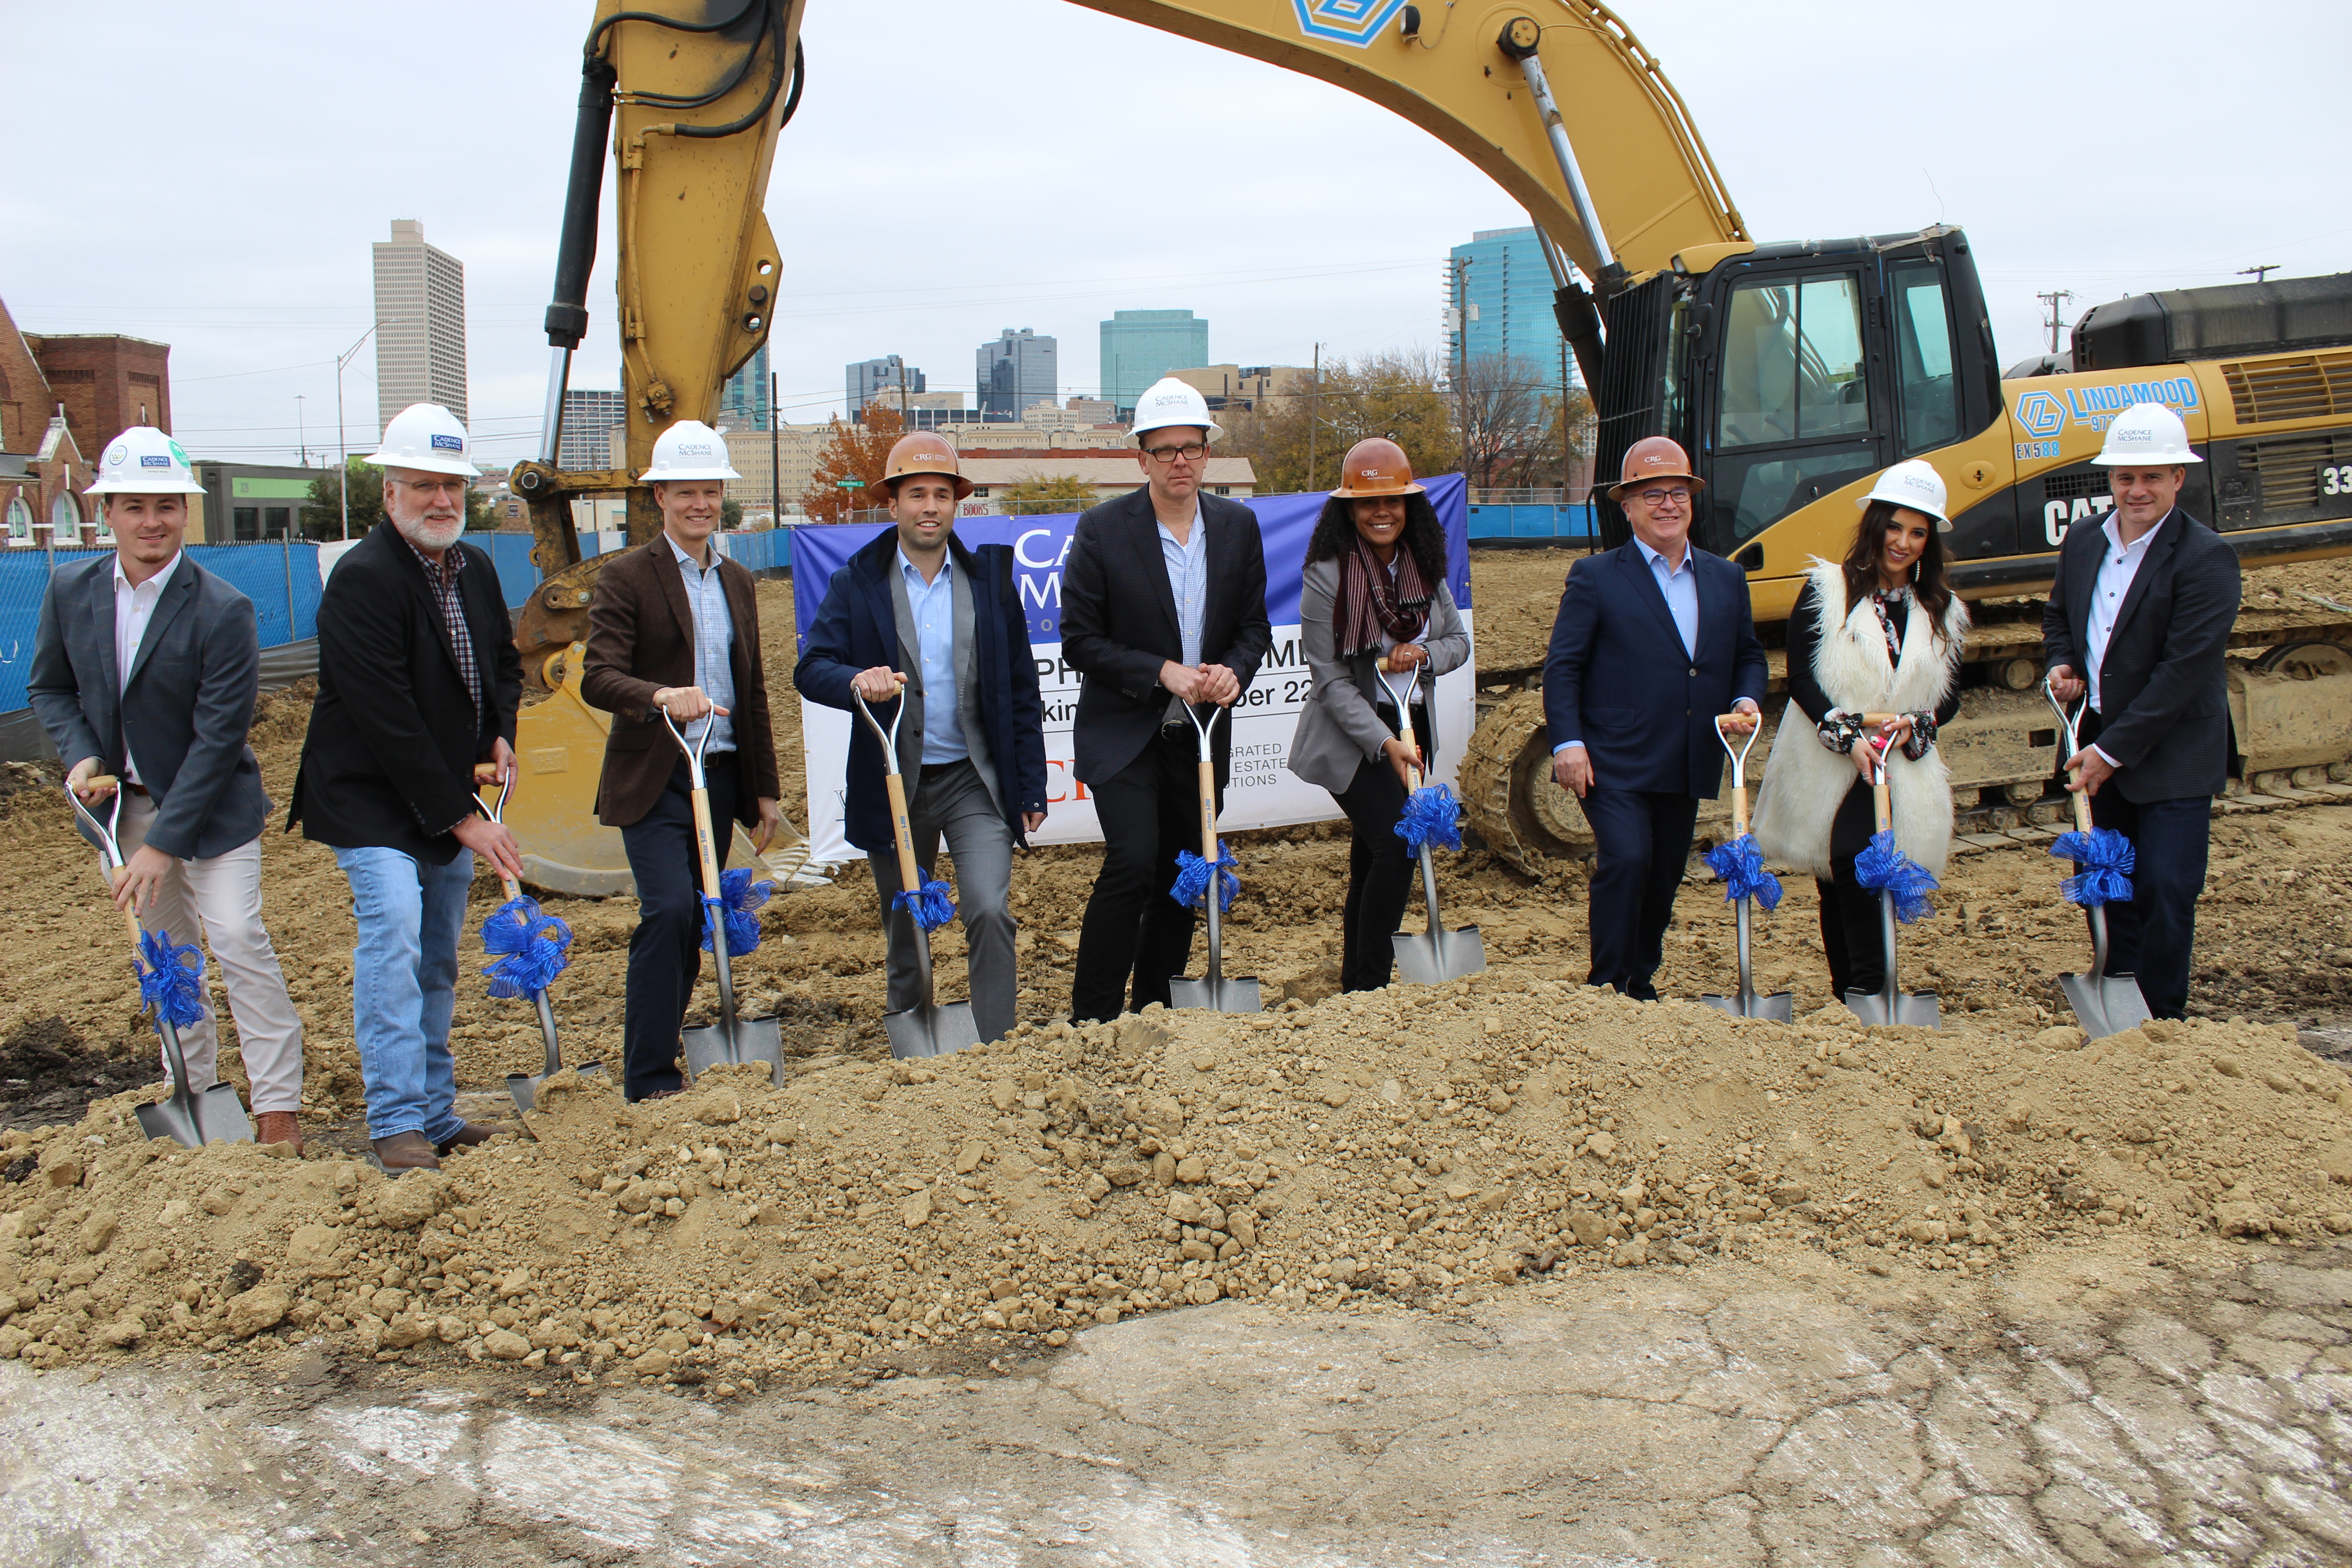 Cadence McShane Breaks Ground on New Multifamily Apartment Complex